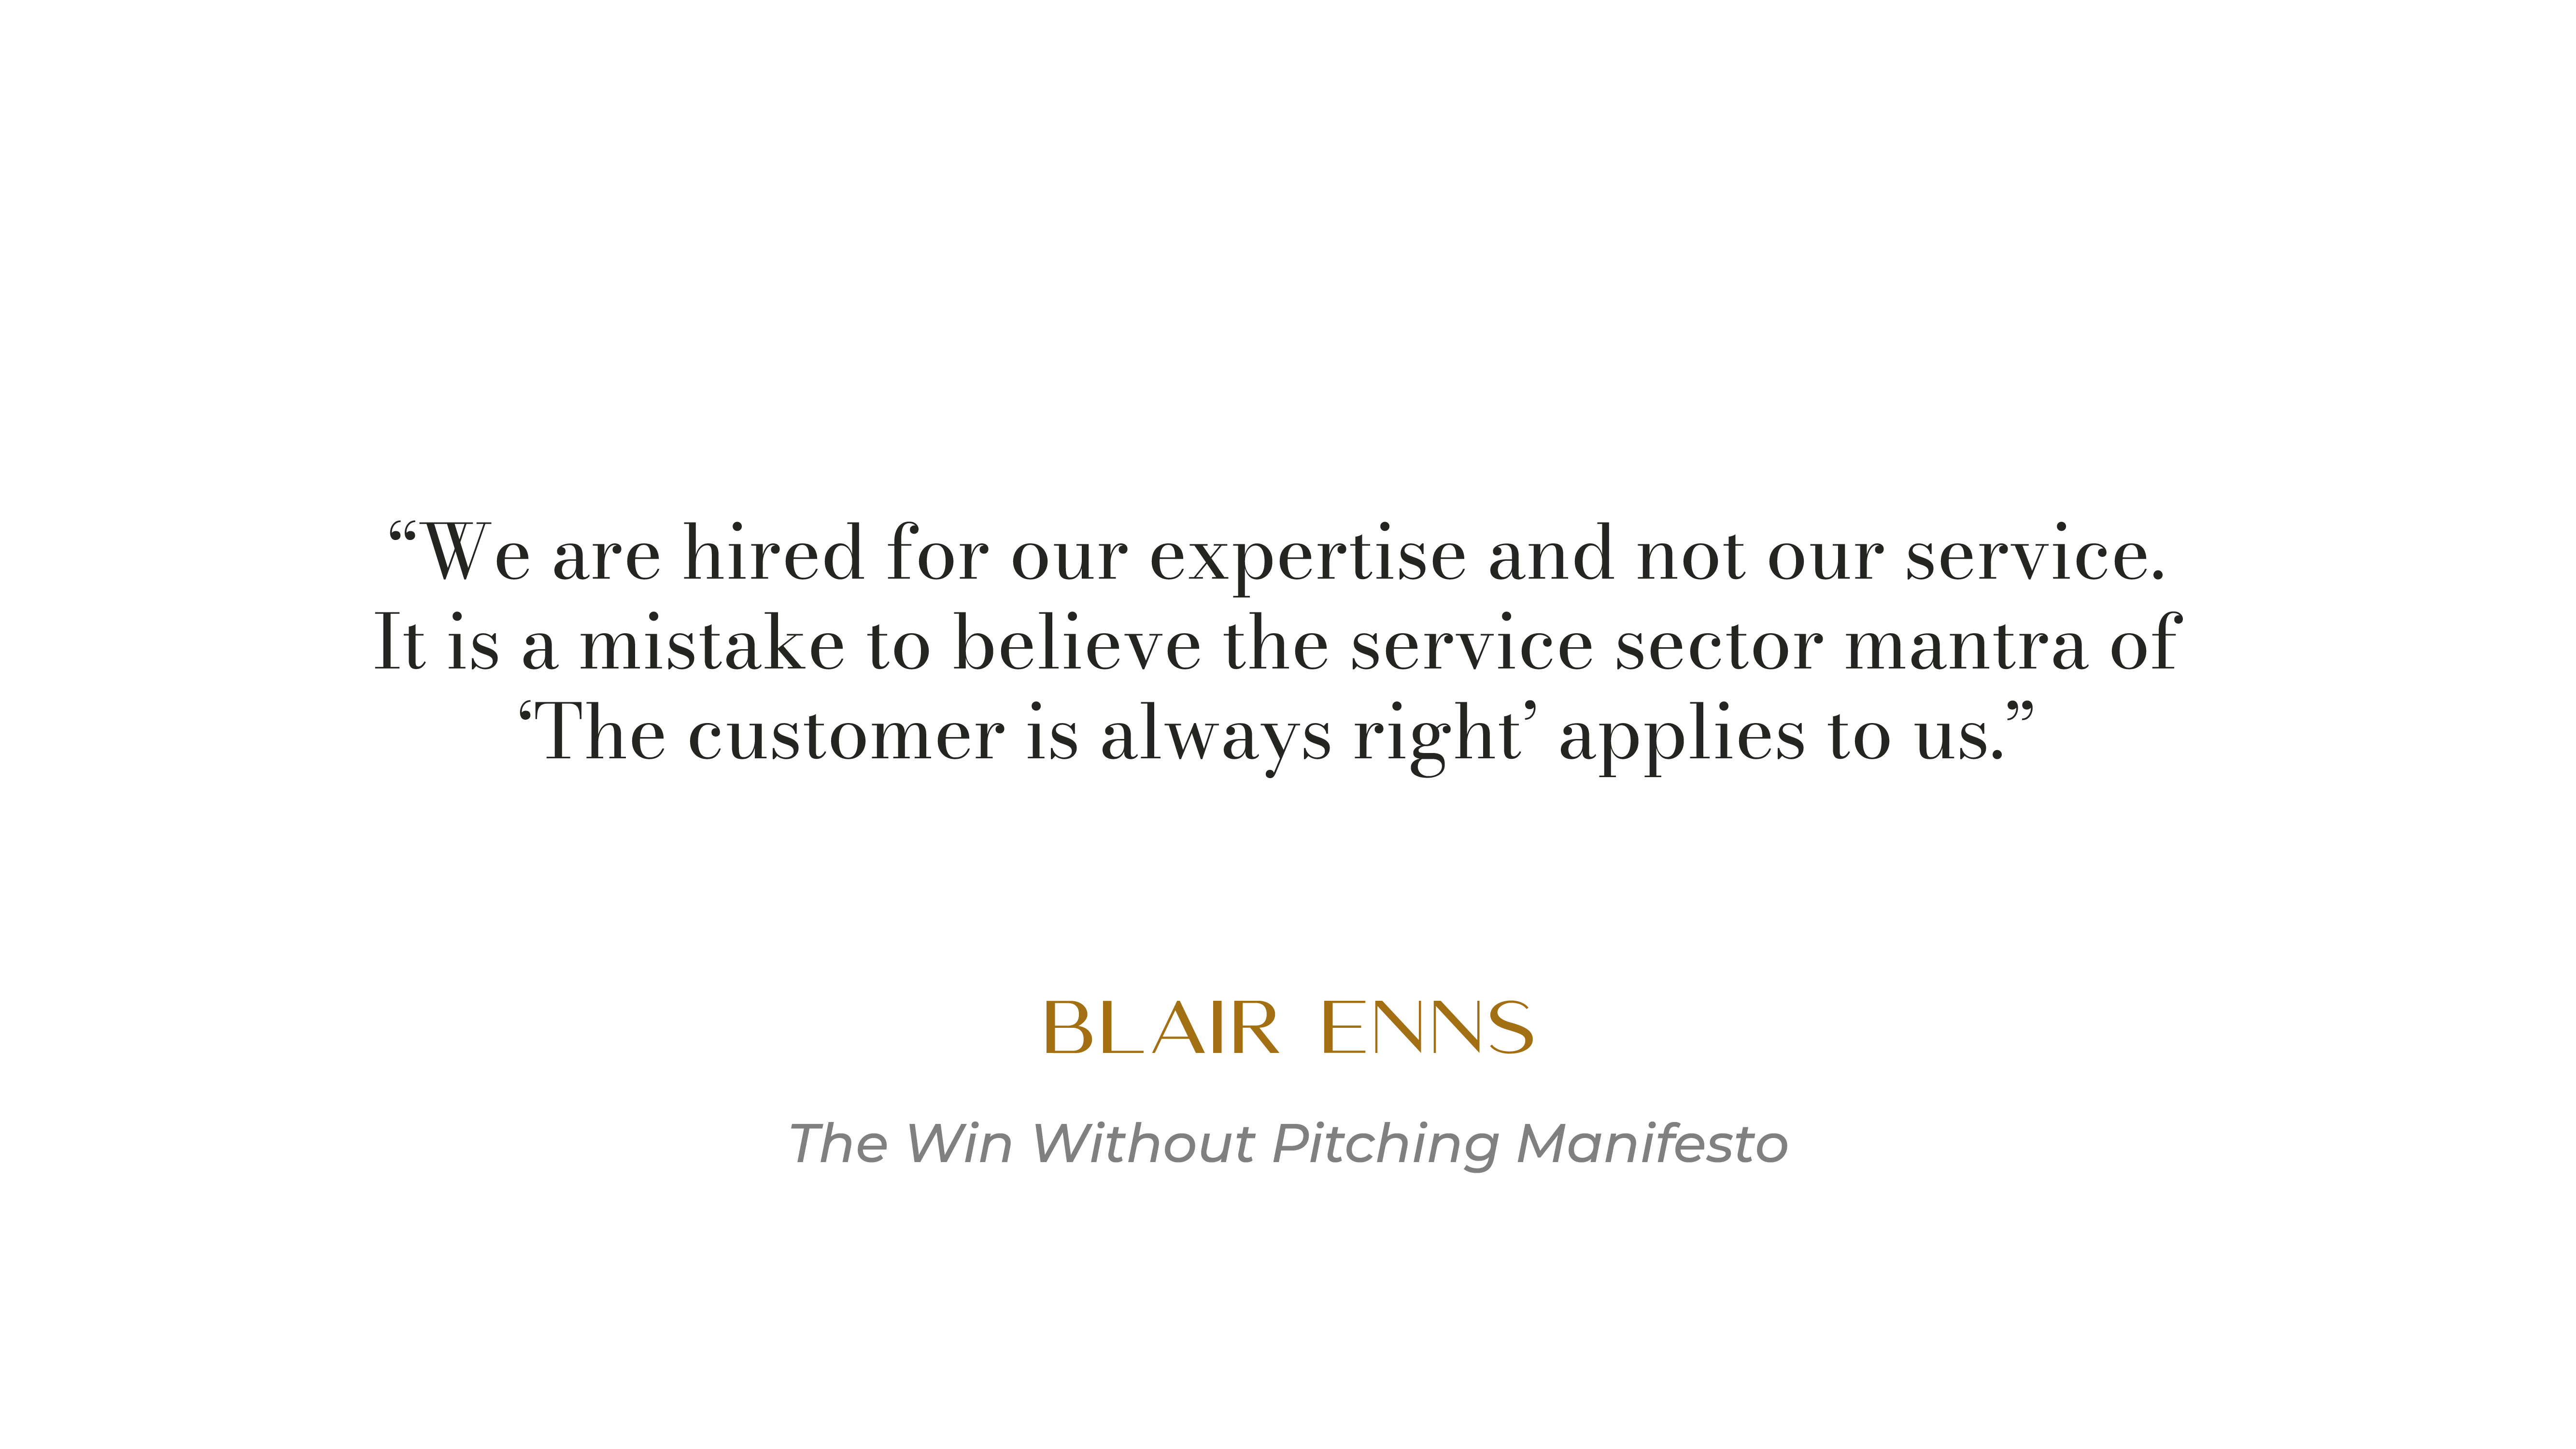 Quote from Blair Enns from The Win Without Pitching Manifesto